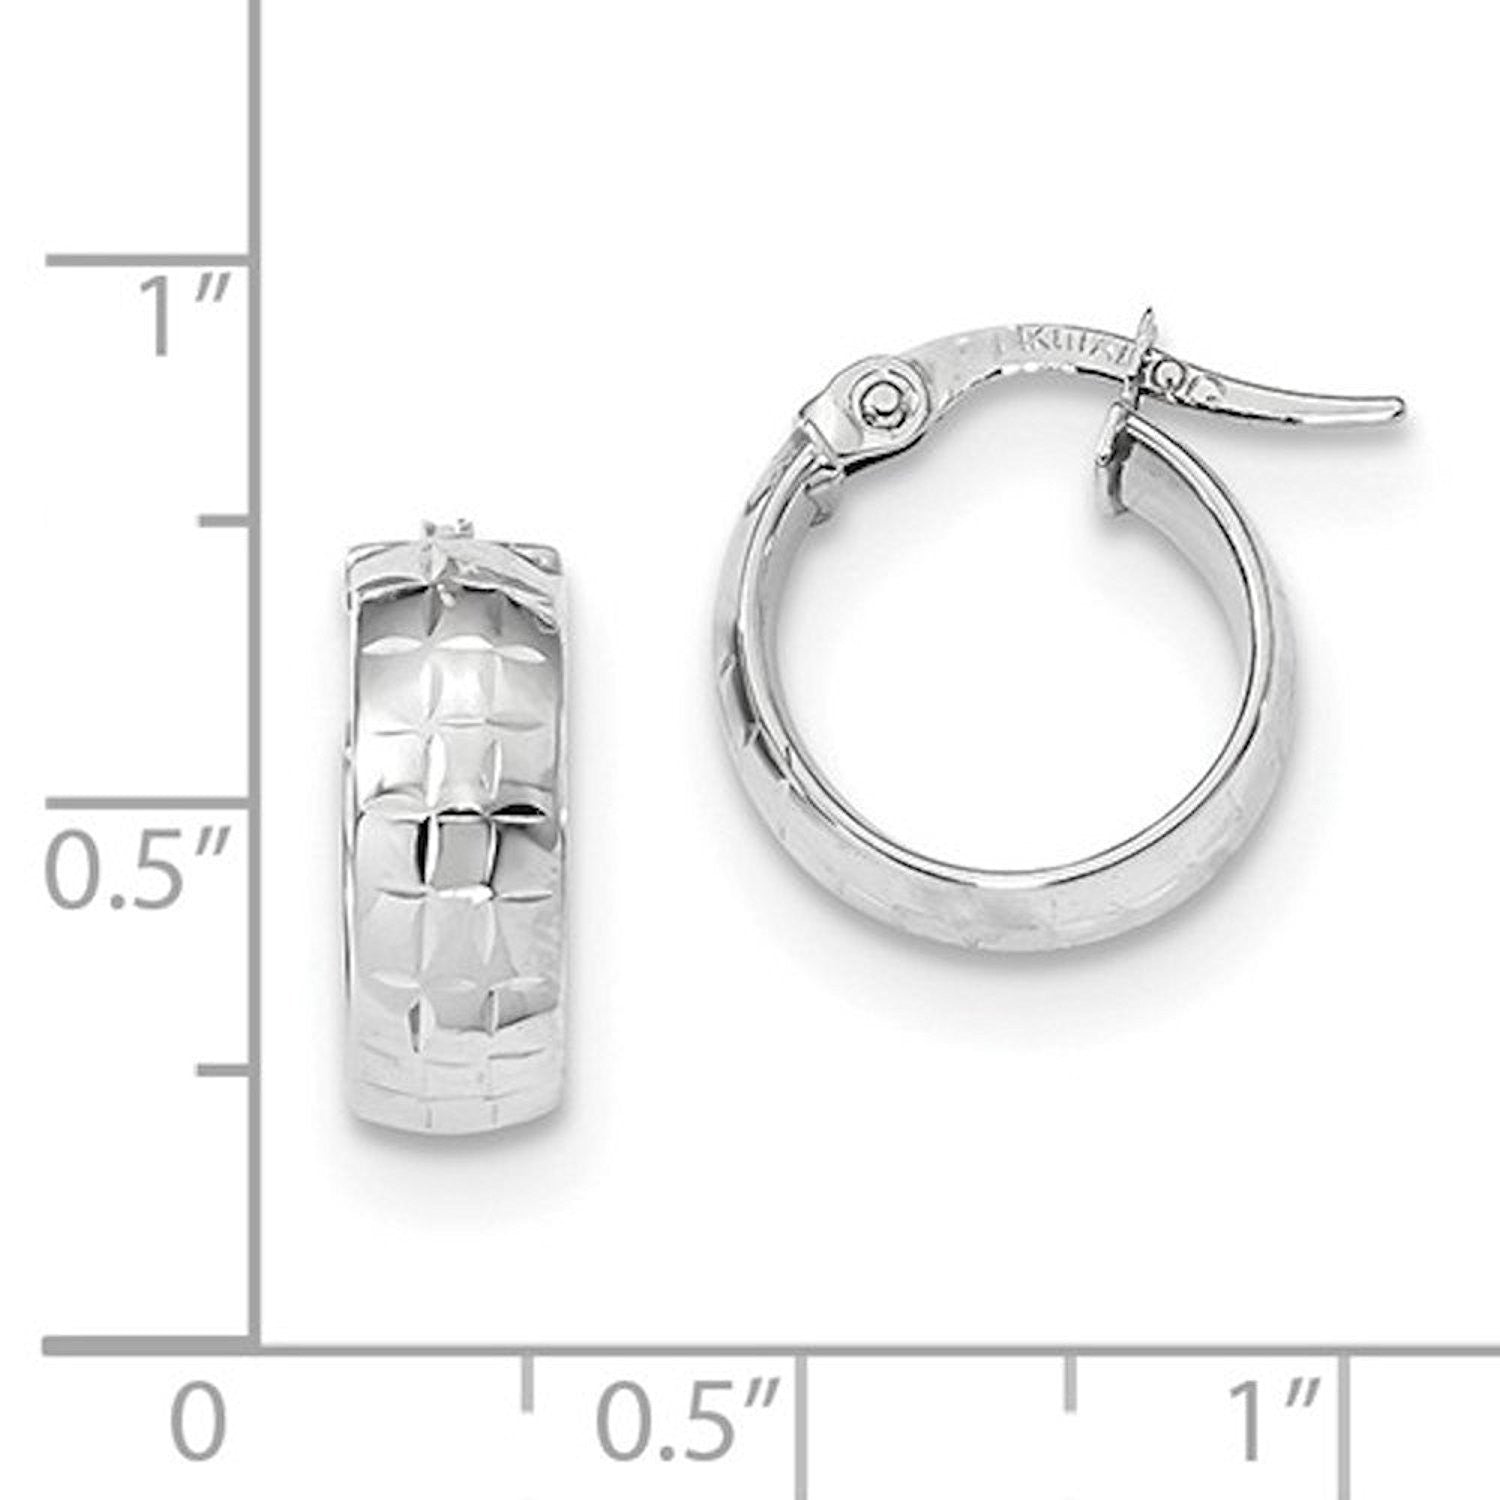 14K White Gold 14mmx13mmx5mm Patterned Round Hoop Earrings